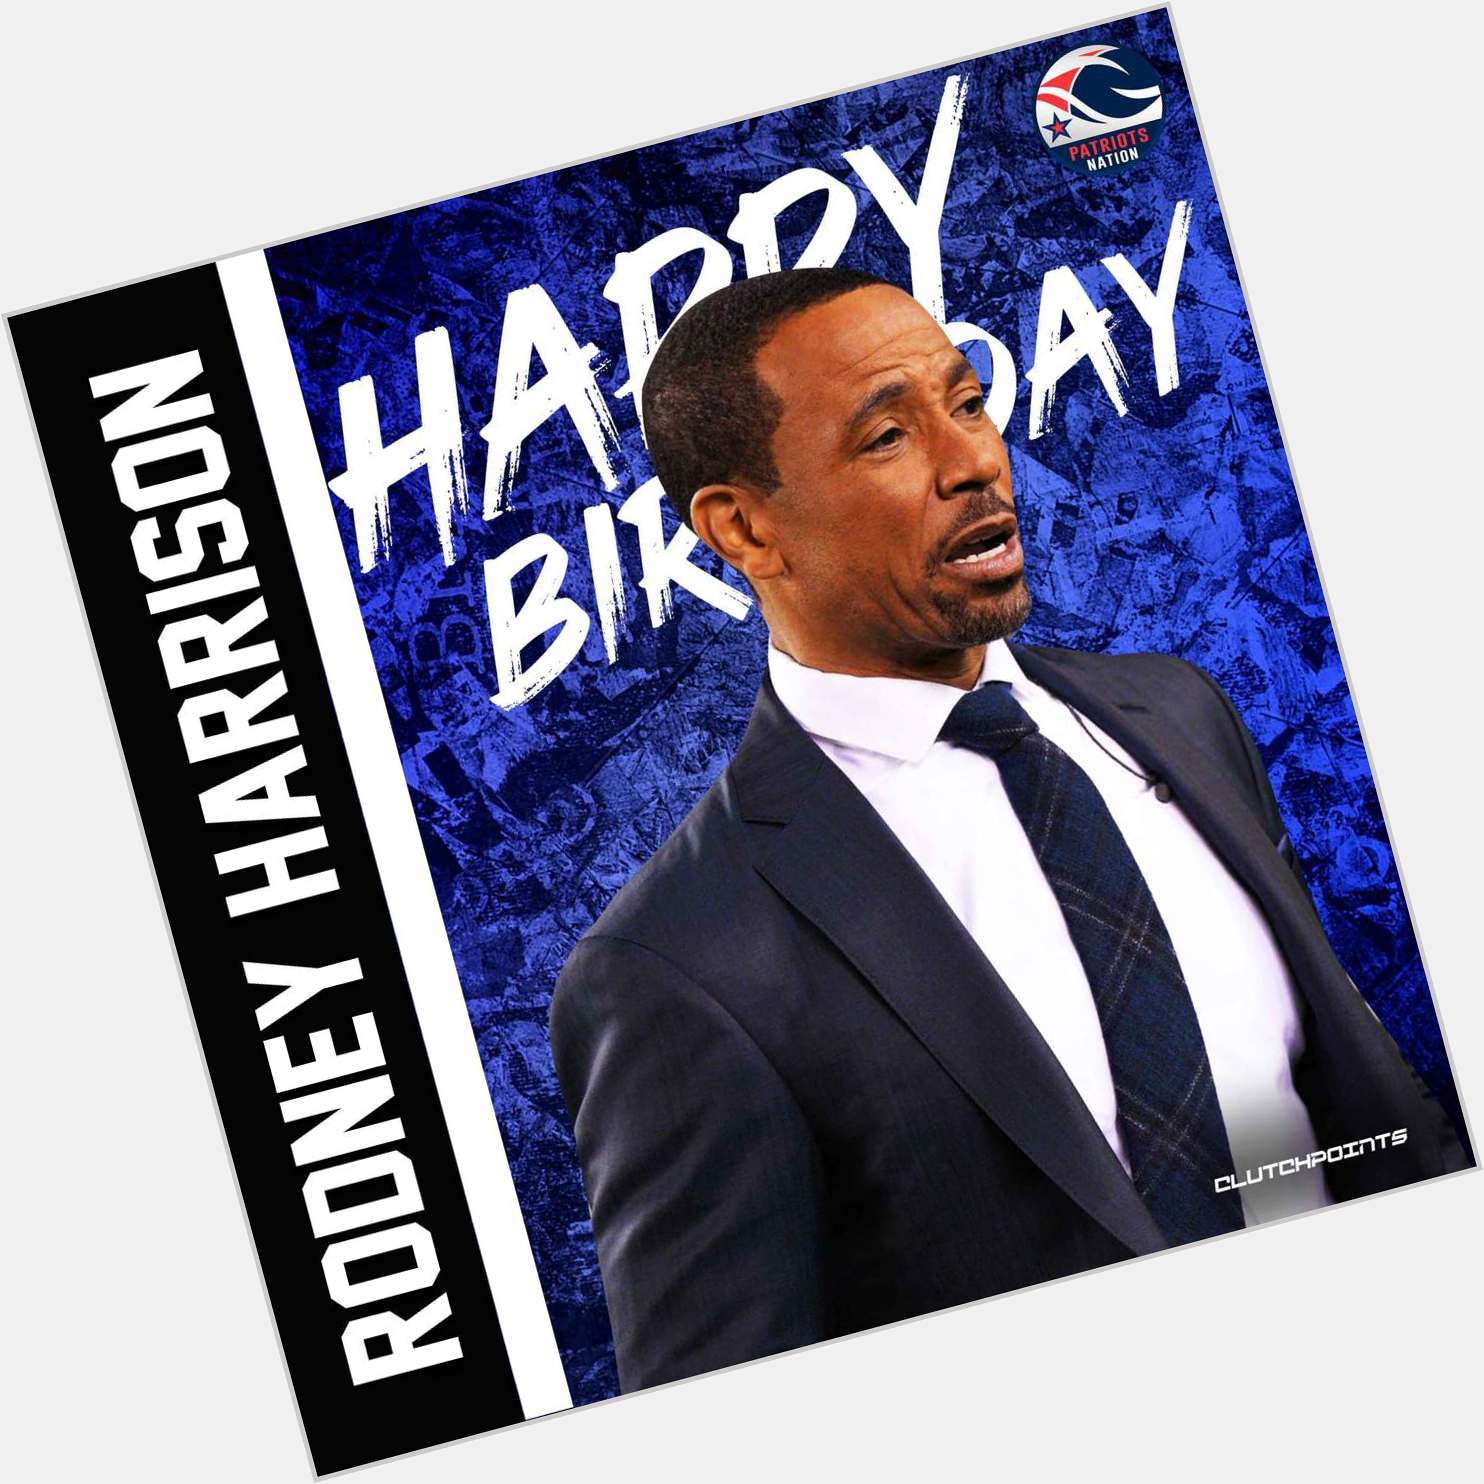 Patriots Nation, join us in wishing Rodney Harrison a happy 50th birthday 